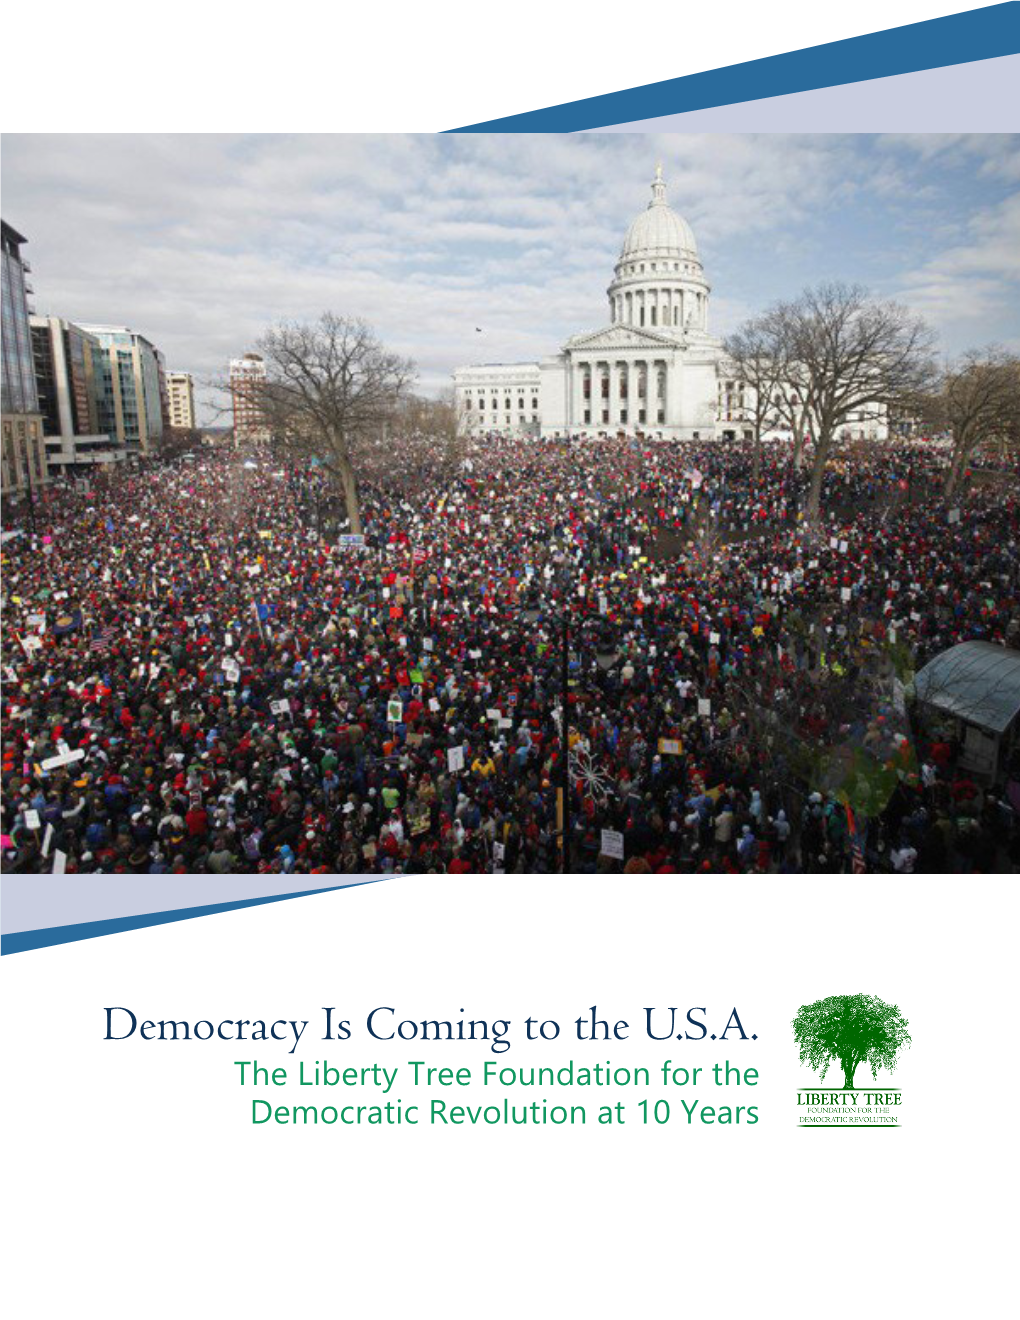 The Liberty Tree Foundation for the Democratic Revolution at 10